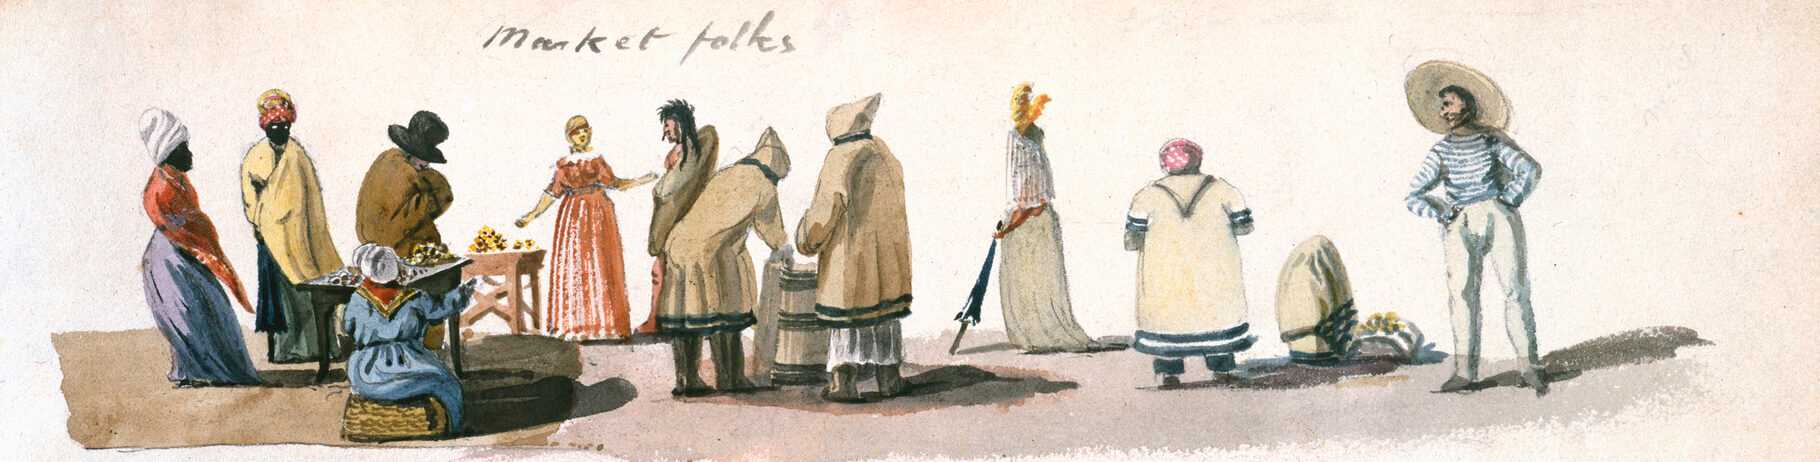 Watercolor painting of different merchants at a market